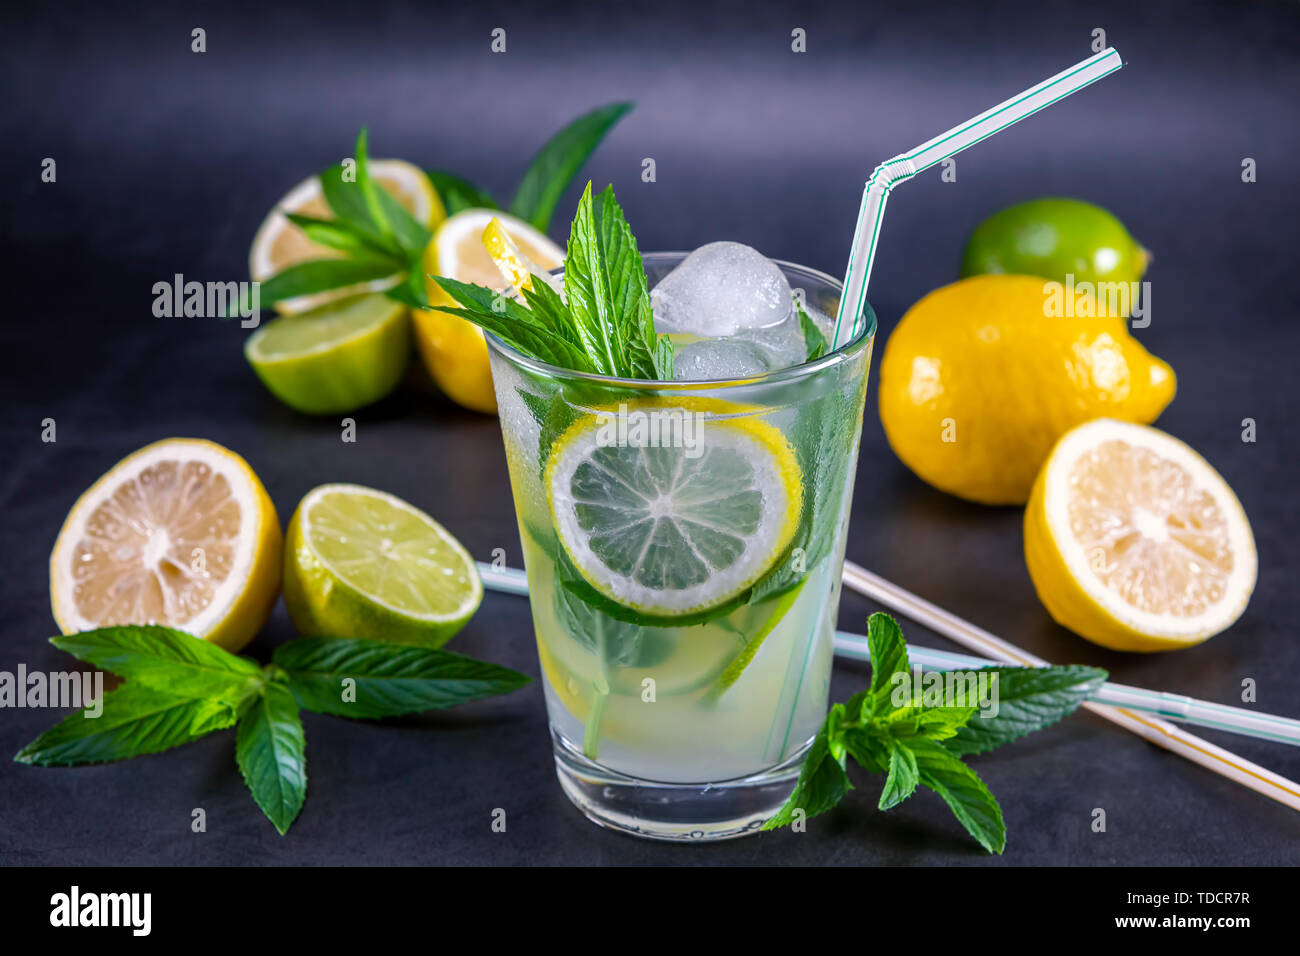 Cold refreshing summer lemonade with mint in a glass on a grey and black background. Focus on leaf in glass. Stock Photo